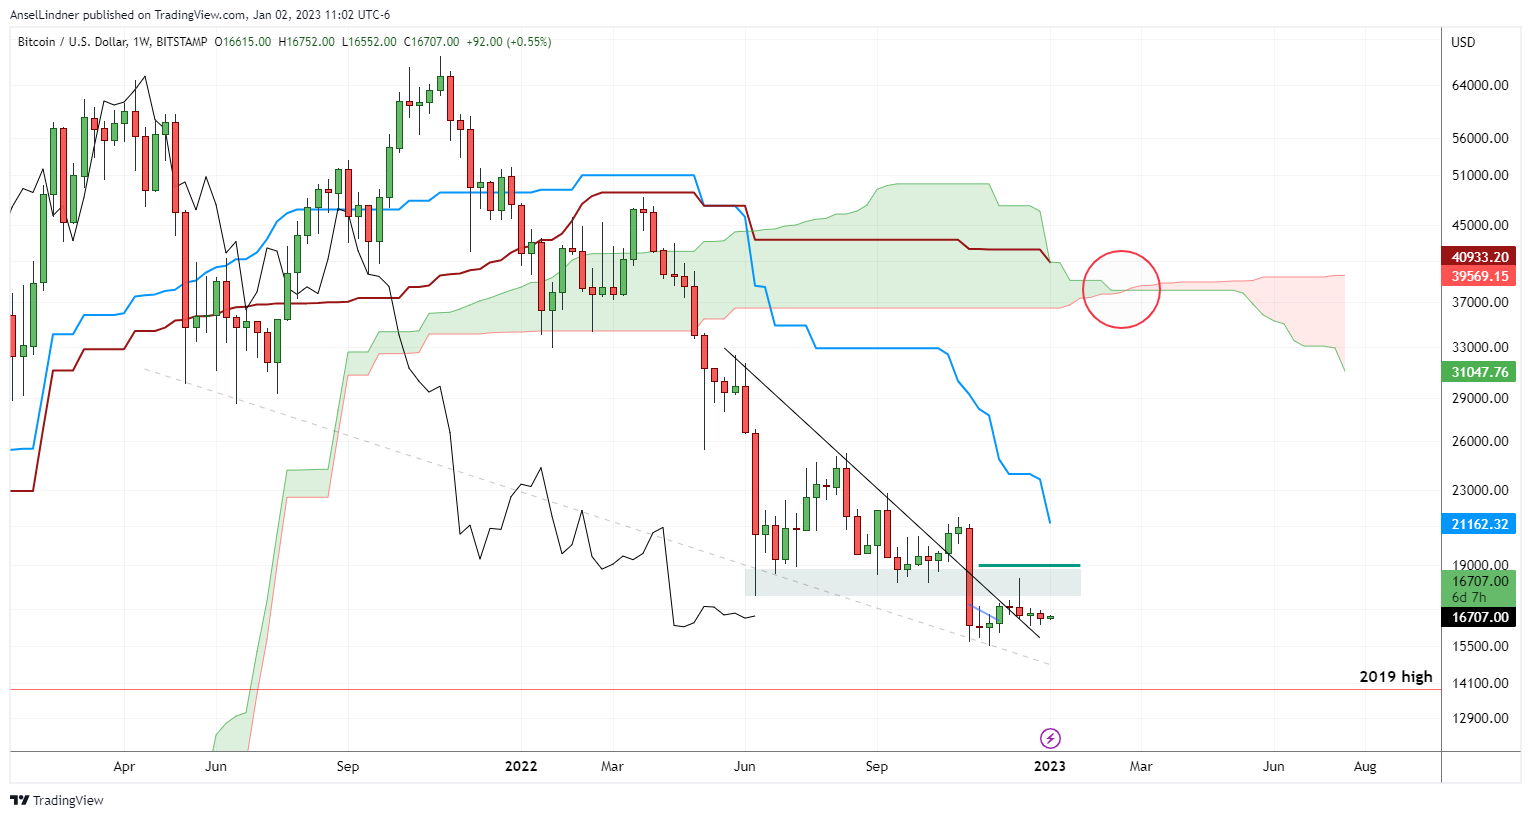 Bitcoin weekly chart with extended cloud settings